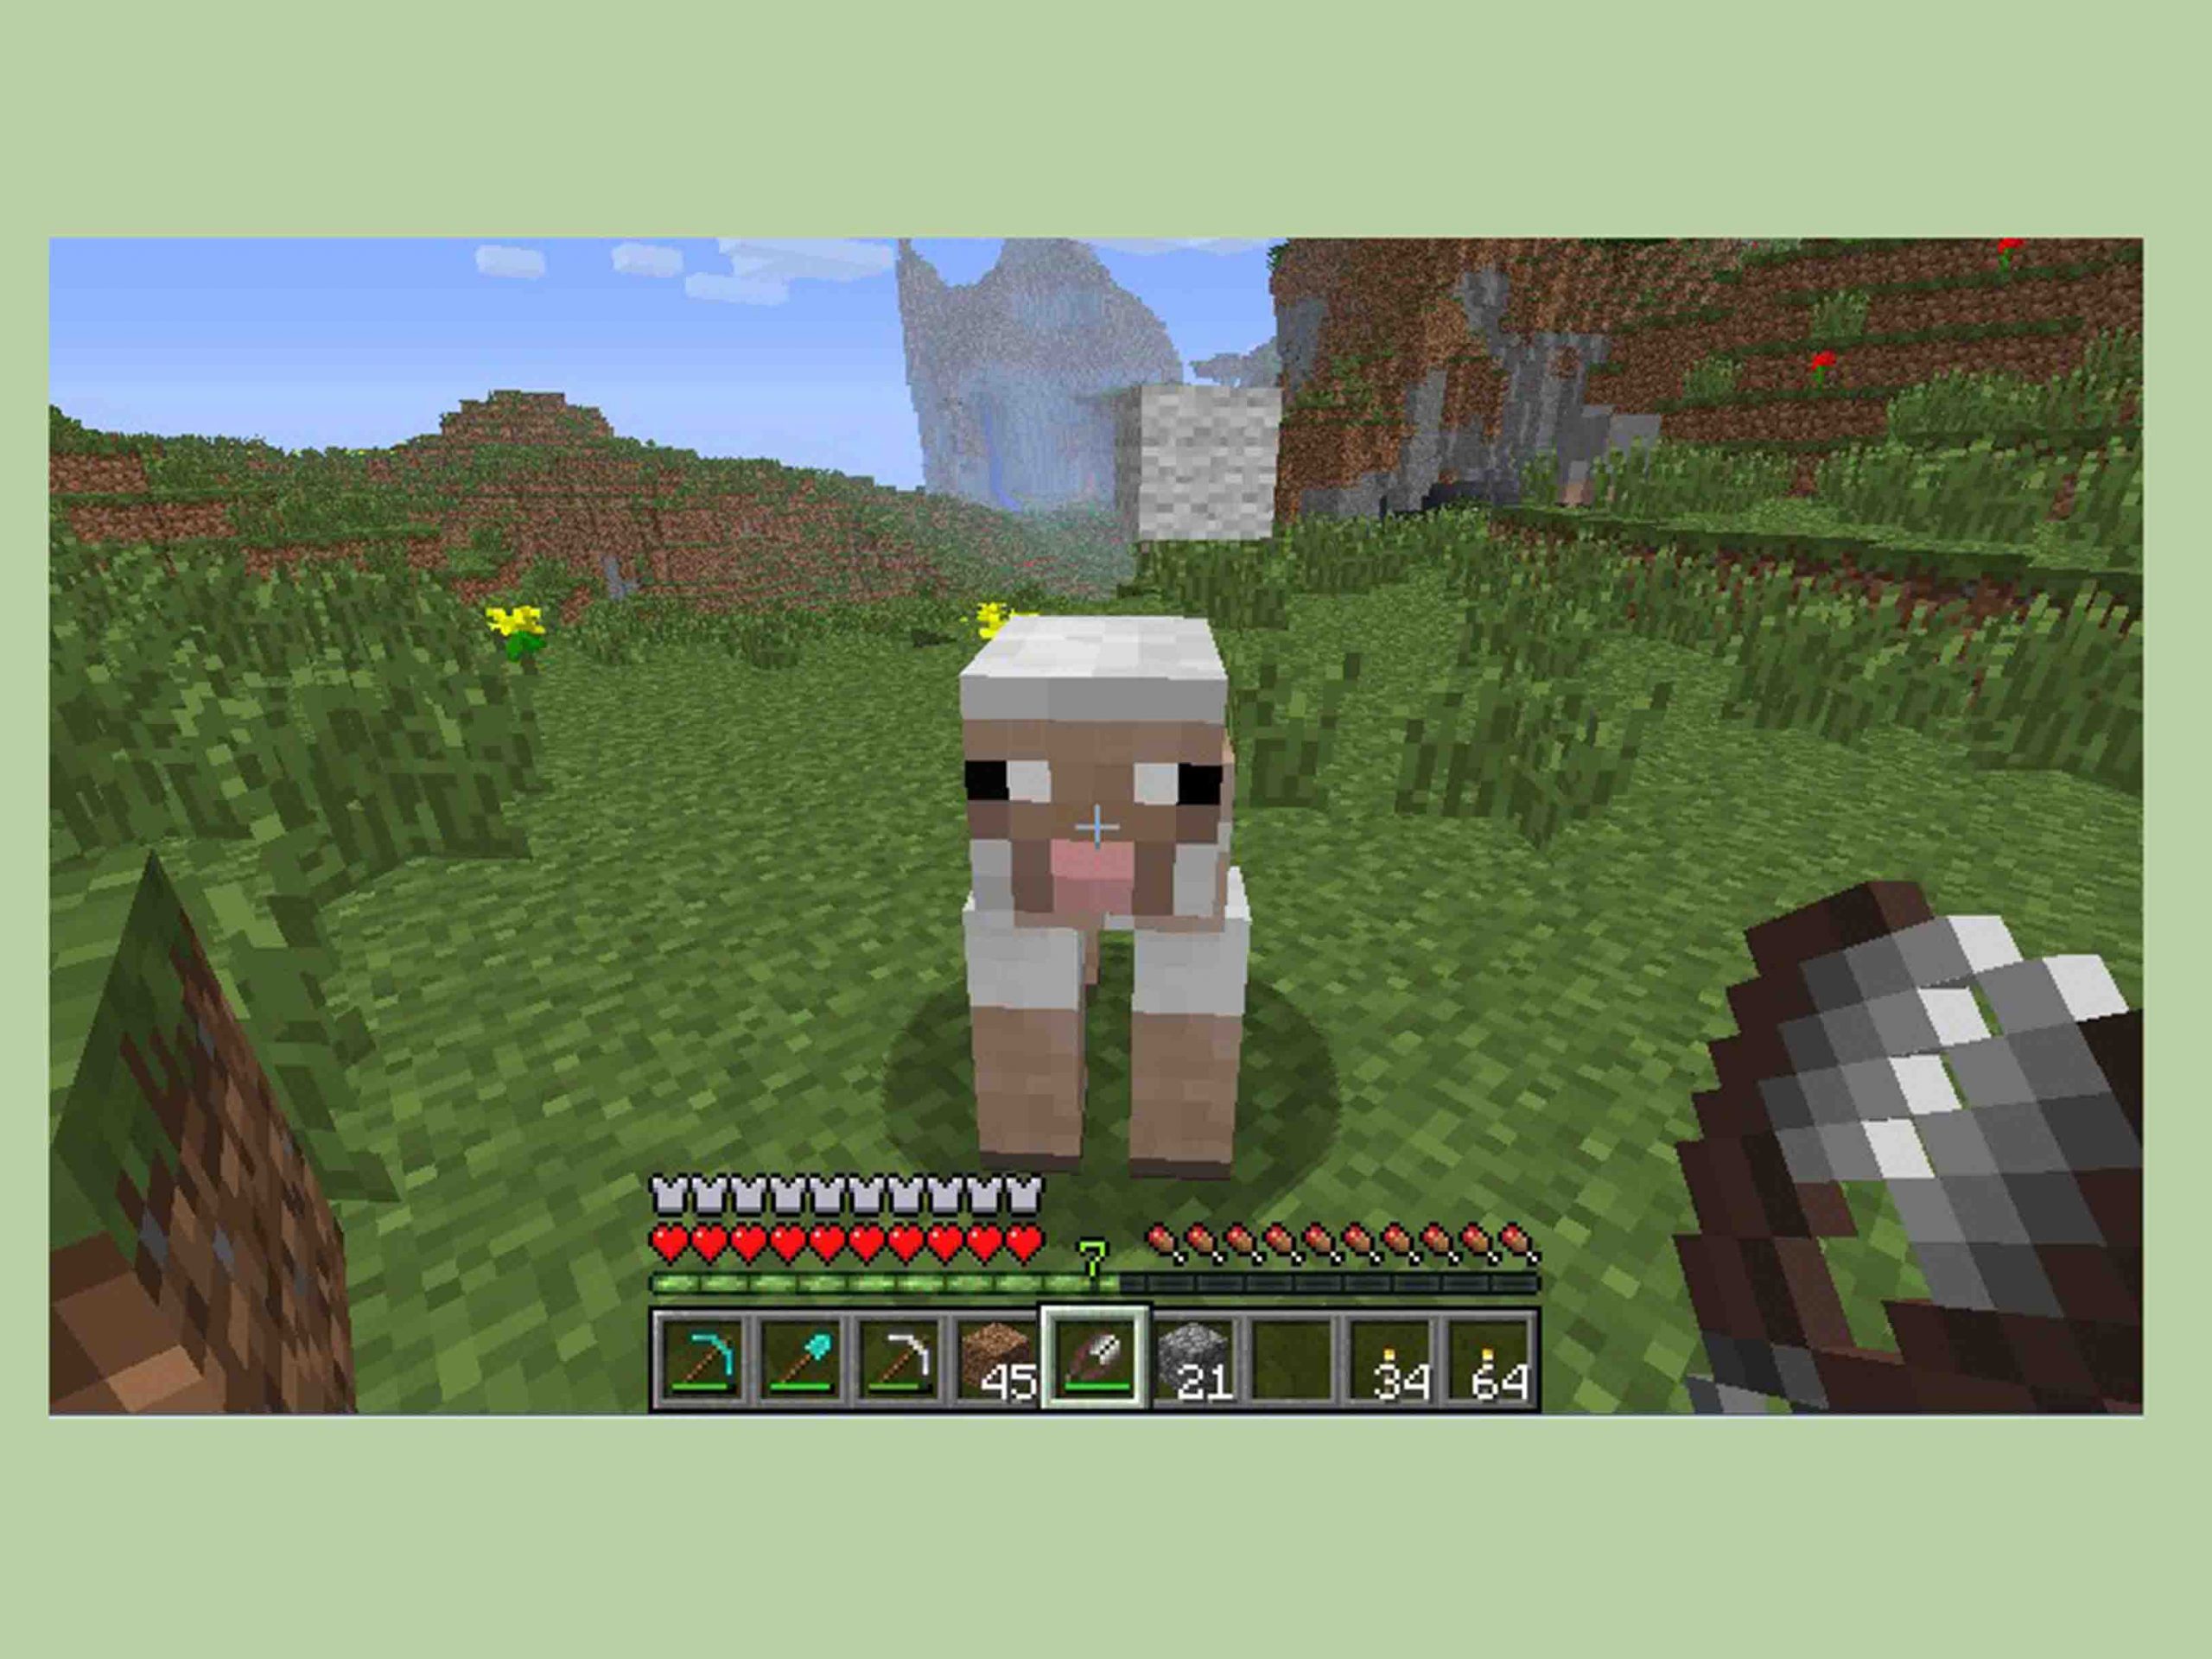 How to Shear a Sheep on Minecraft: 4 Steps (with Pictures)